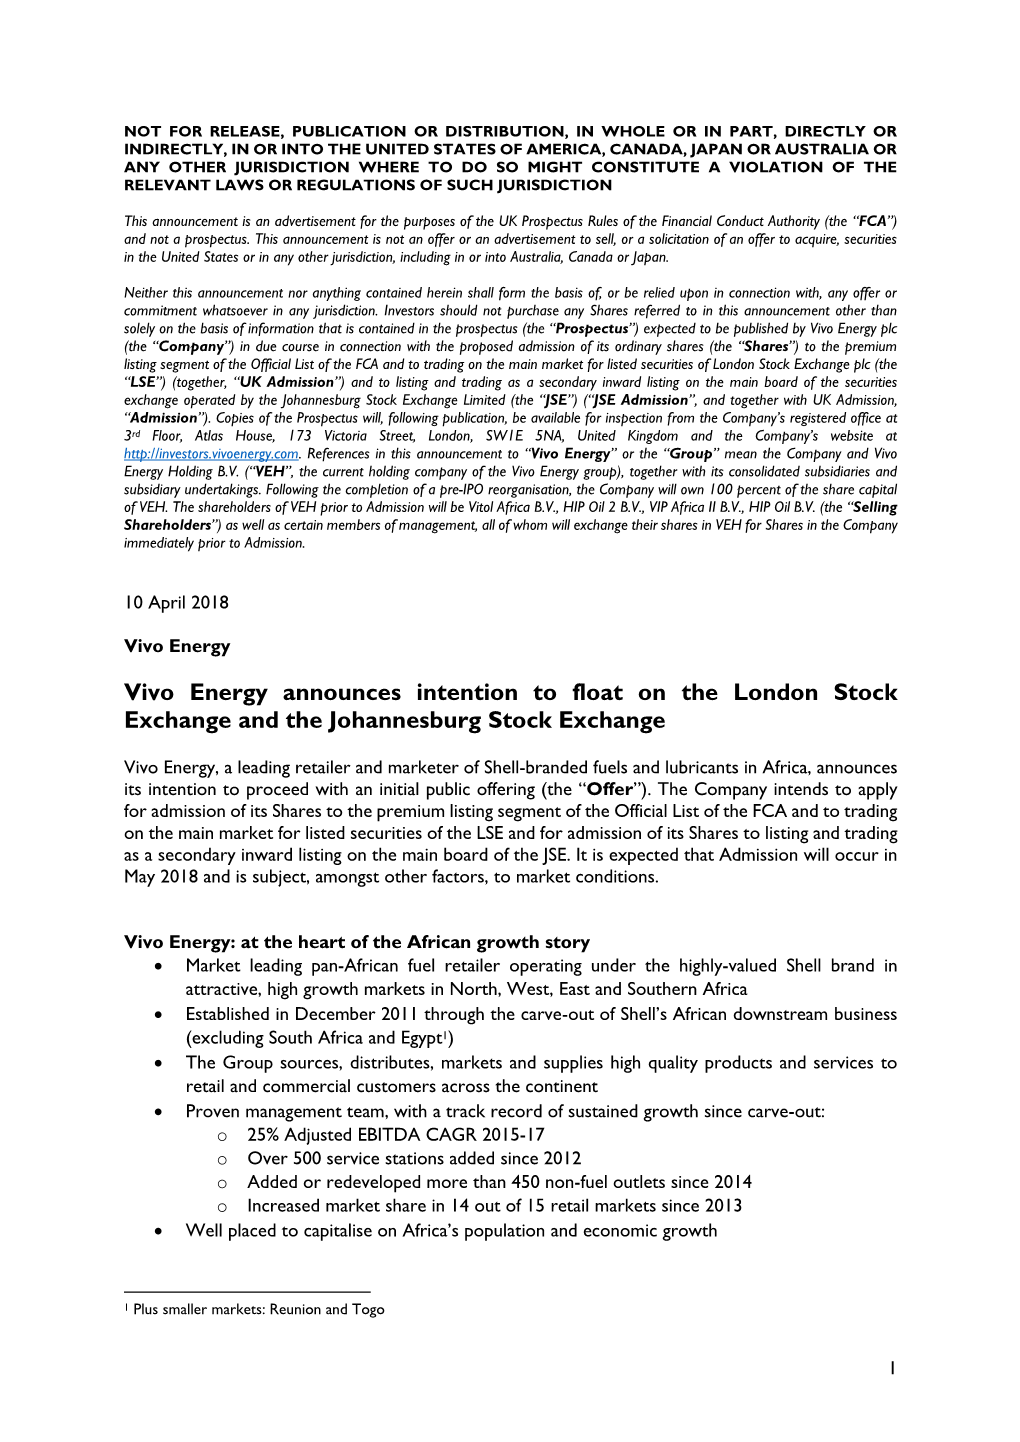 Vivo Energy Announces Intention to Float on the London Stock Exchange and the Johannesburg Stock Exchange